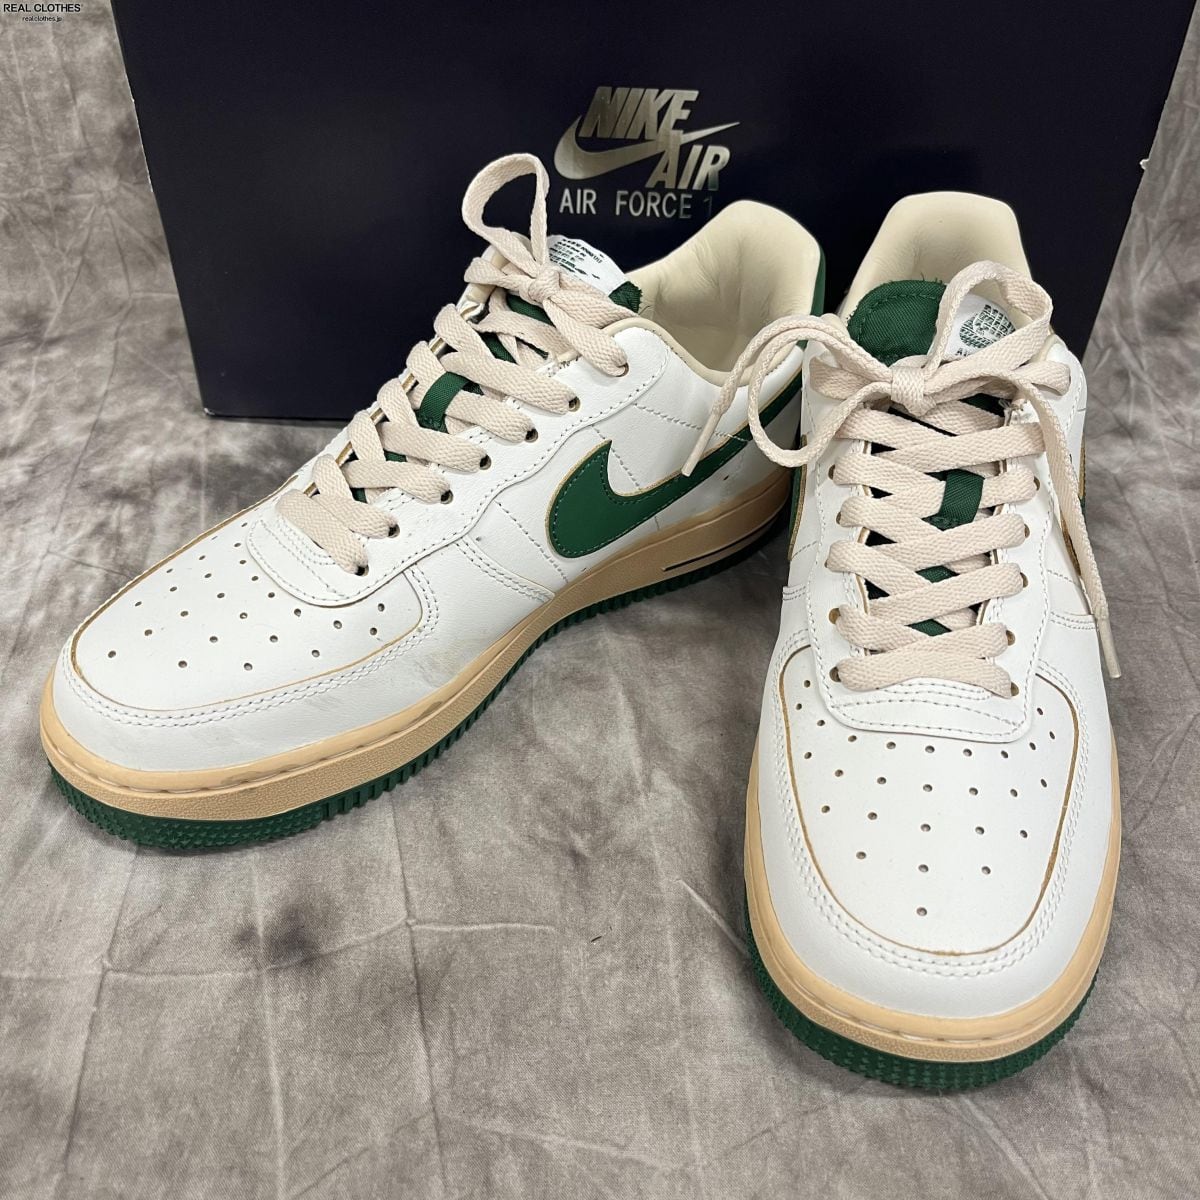 NIKE/ナイキ WMNS AIR FORCE 1 LOW '07 LV8 Green and Muslin 